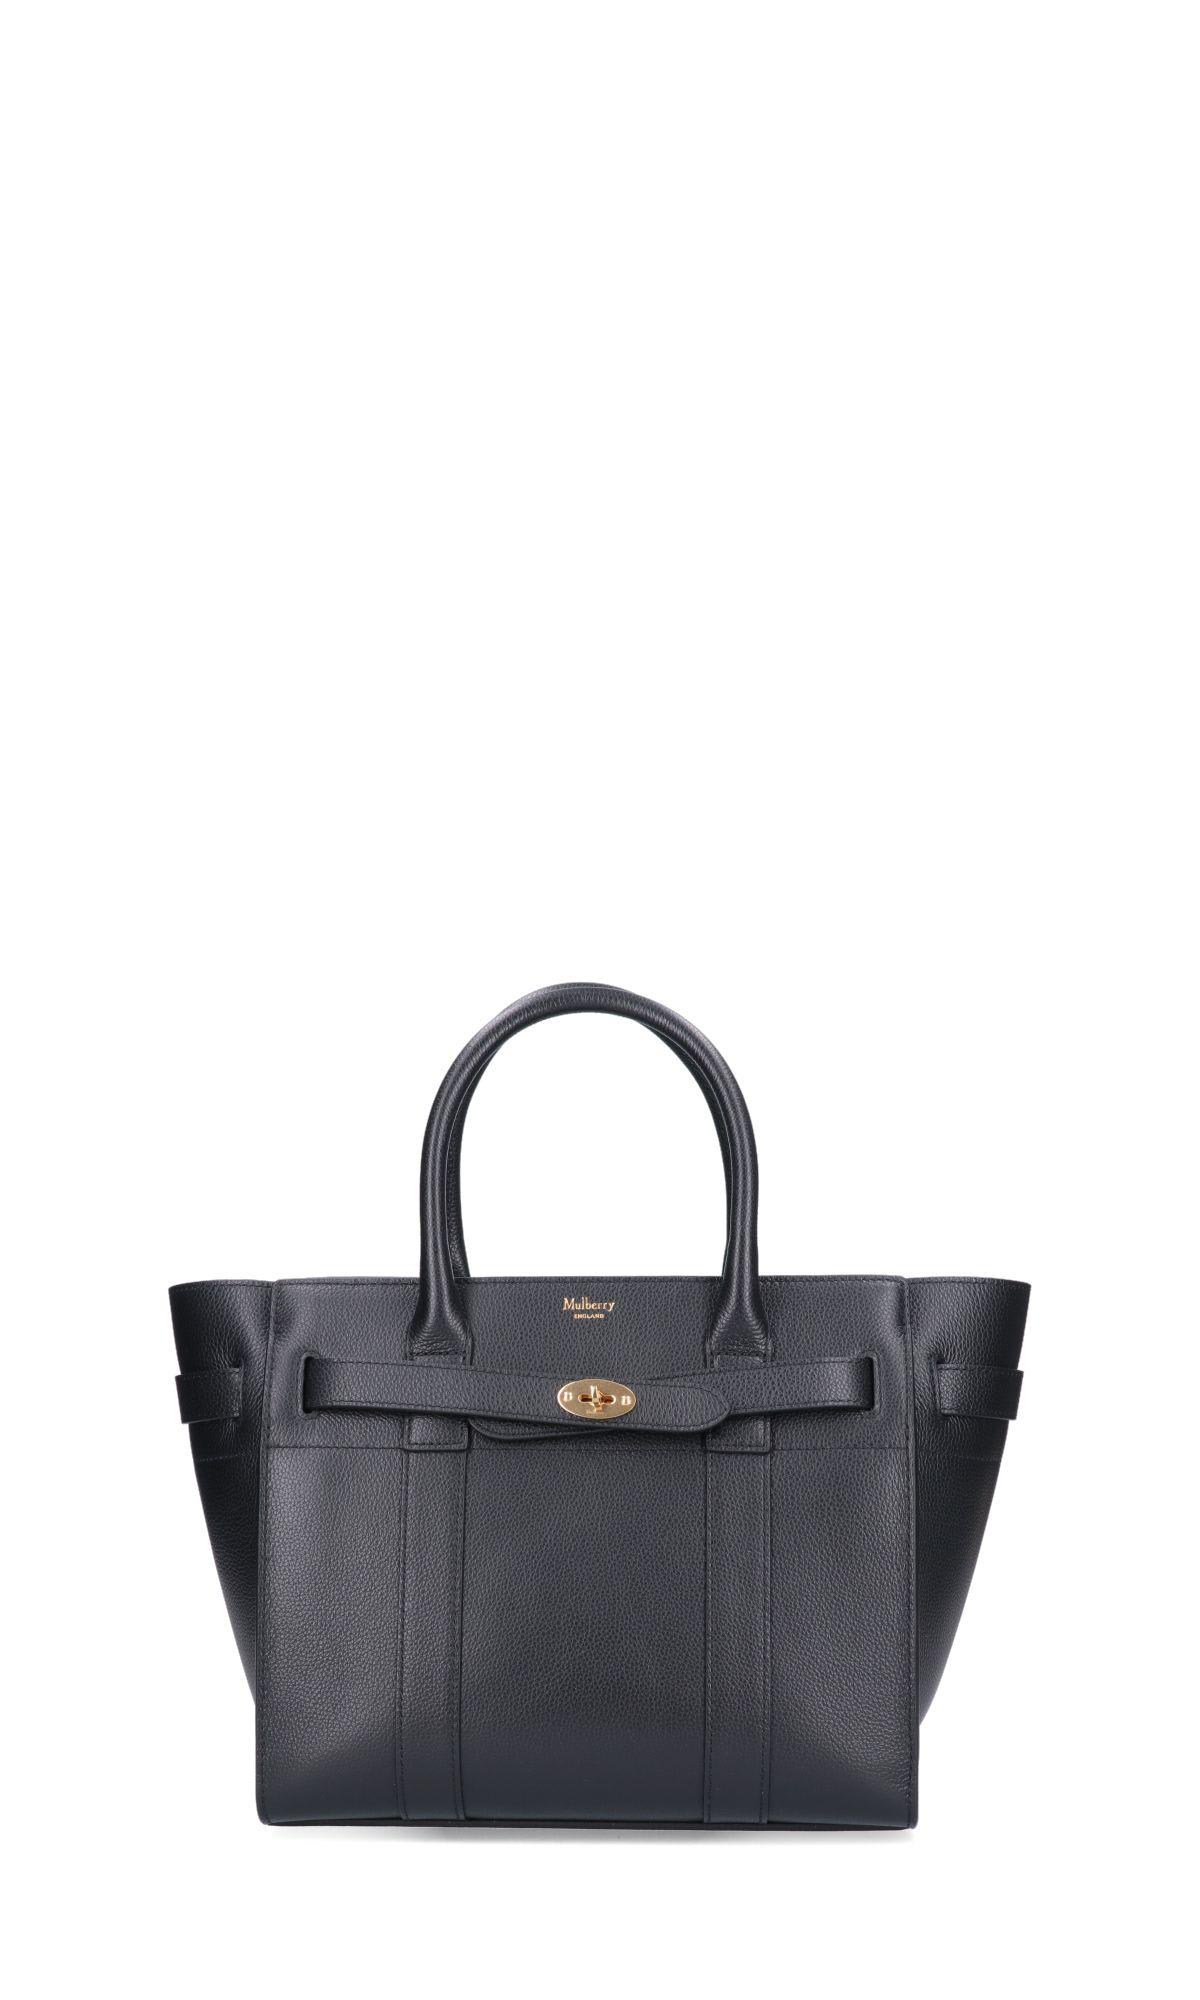 MULBERRY BAYSWATER SMALL HAND BAG